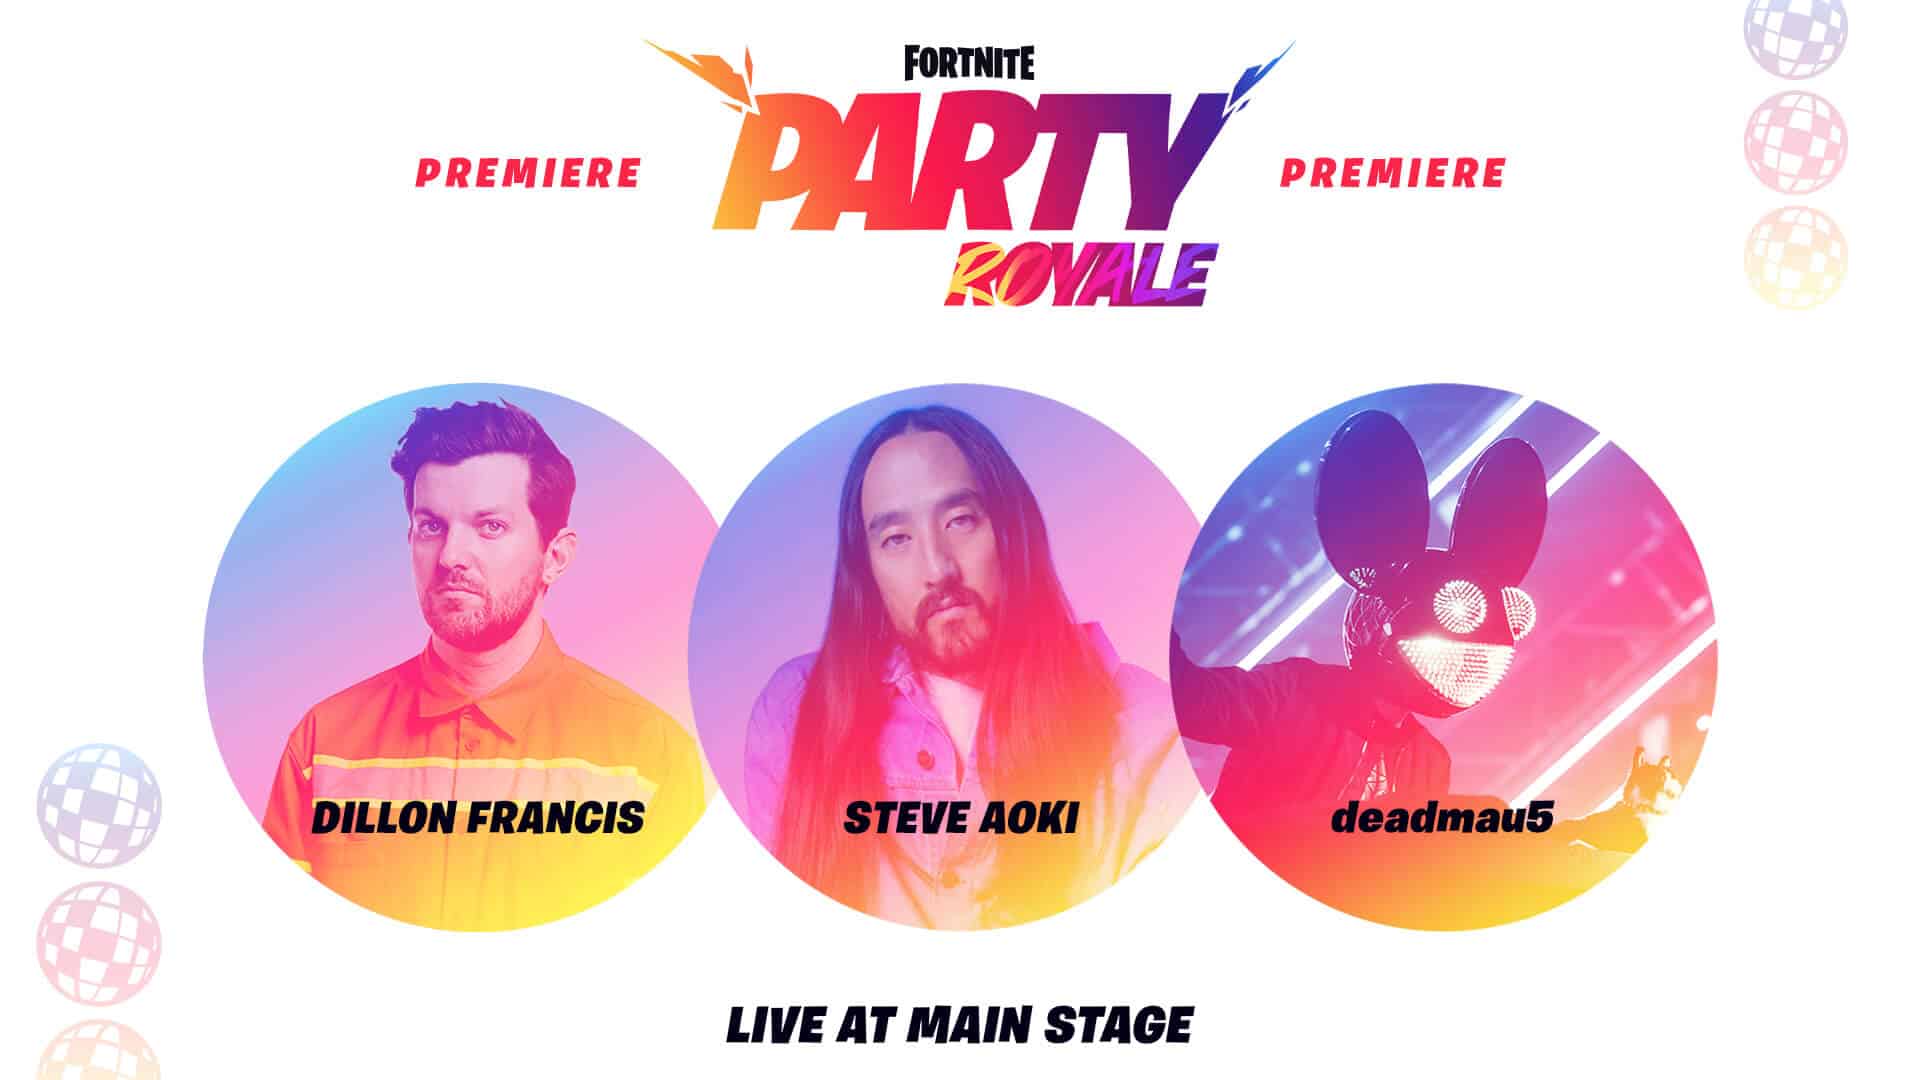 Fortnite Party Royale to Feature Dillon Francis Steve Aoki and deadmau5 Concerts